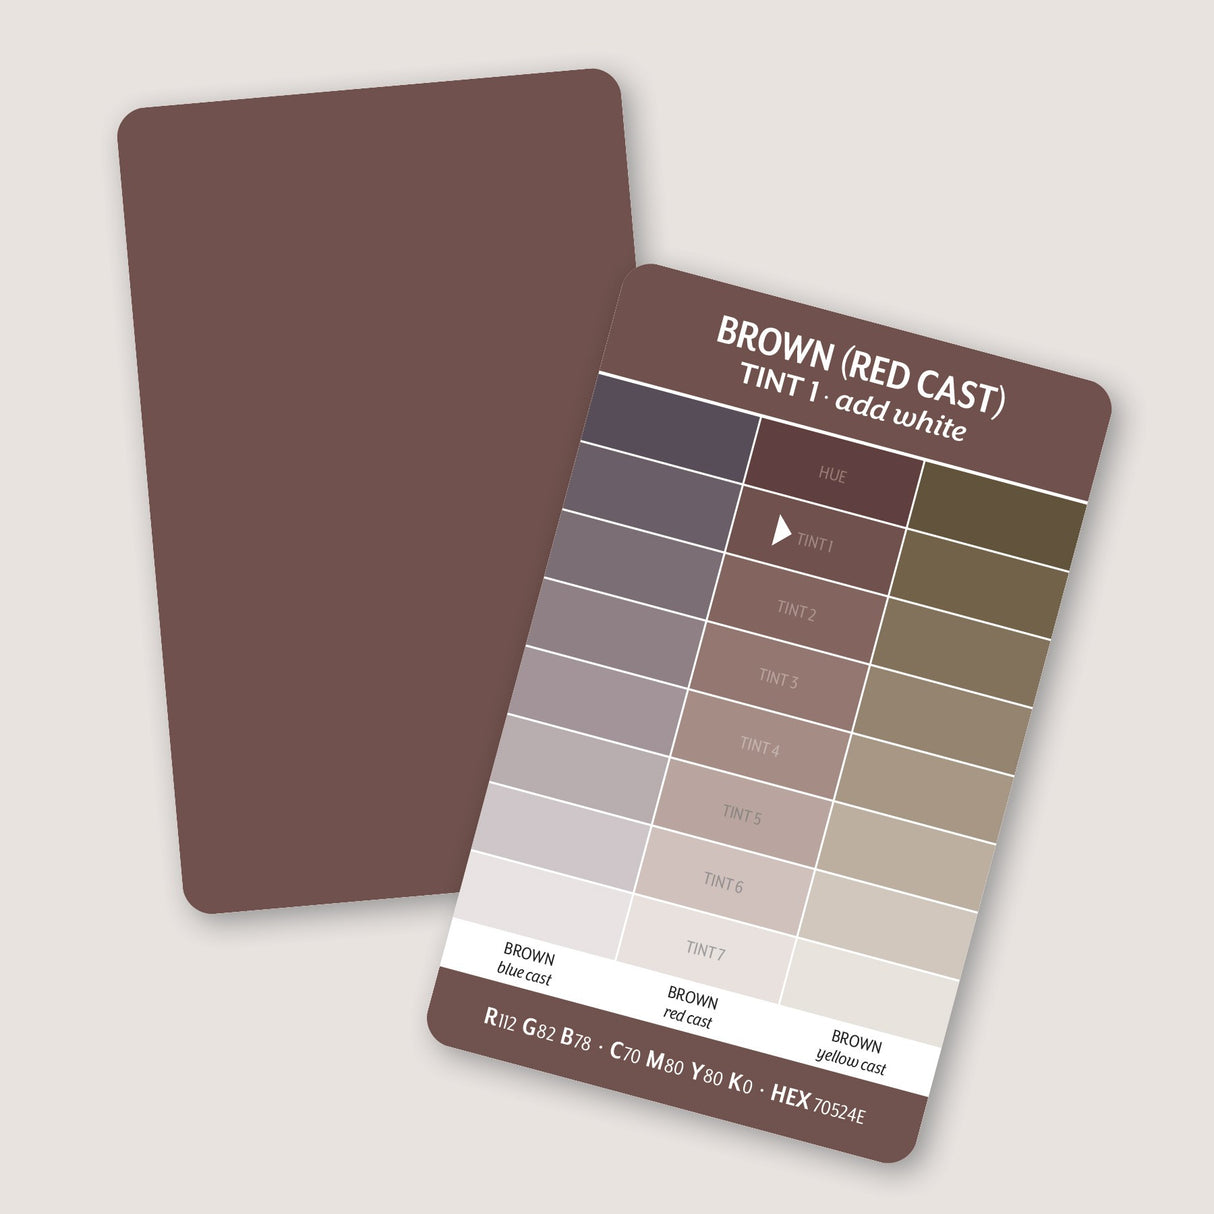 Essential Color Card Deck by C & T Publishing